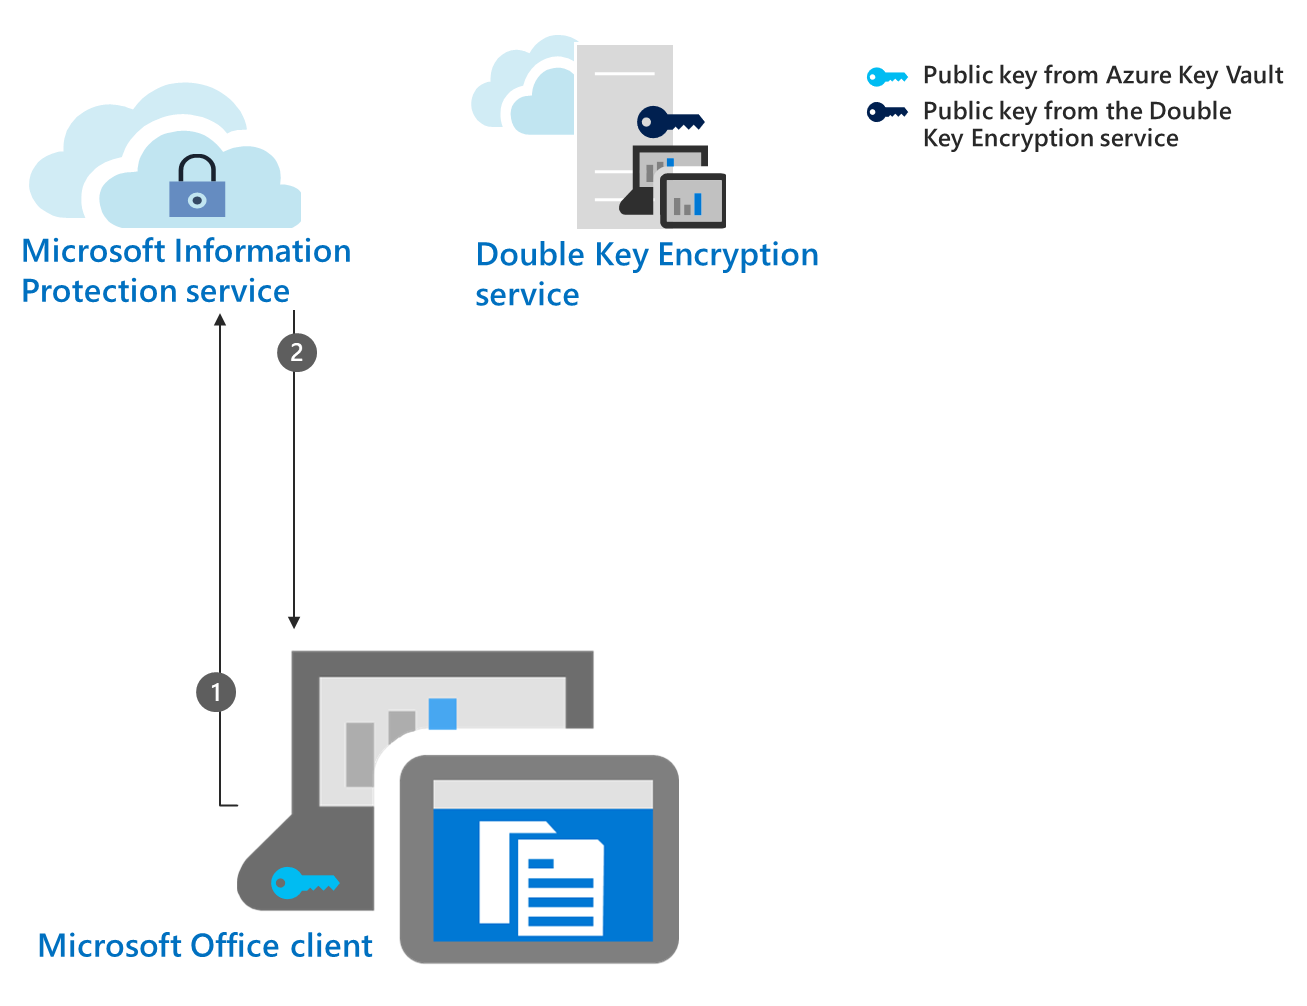 A diagram shows step 2 of the encryption workflow for DKE, collect and cache the Azure public key.